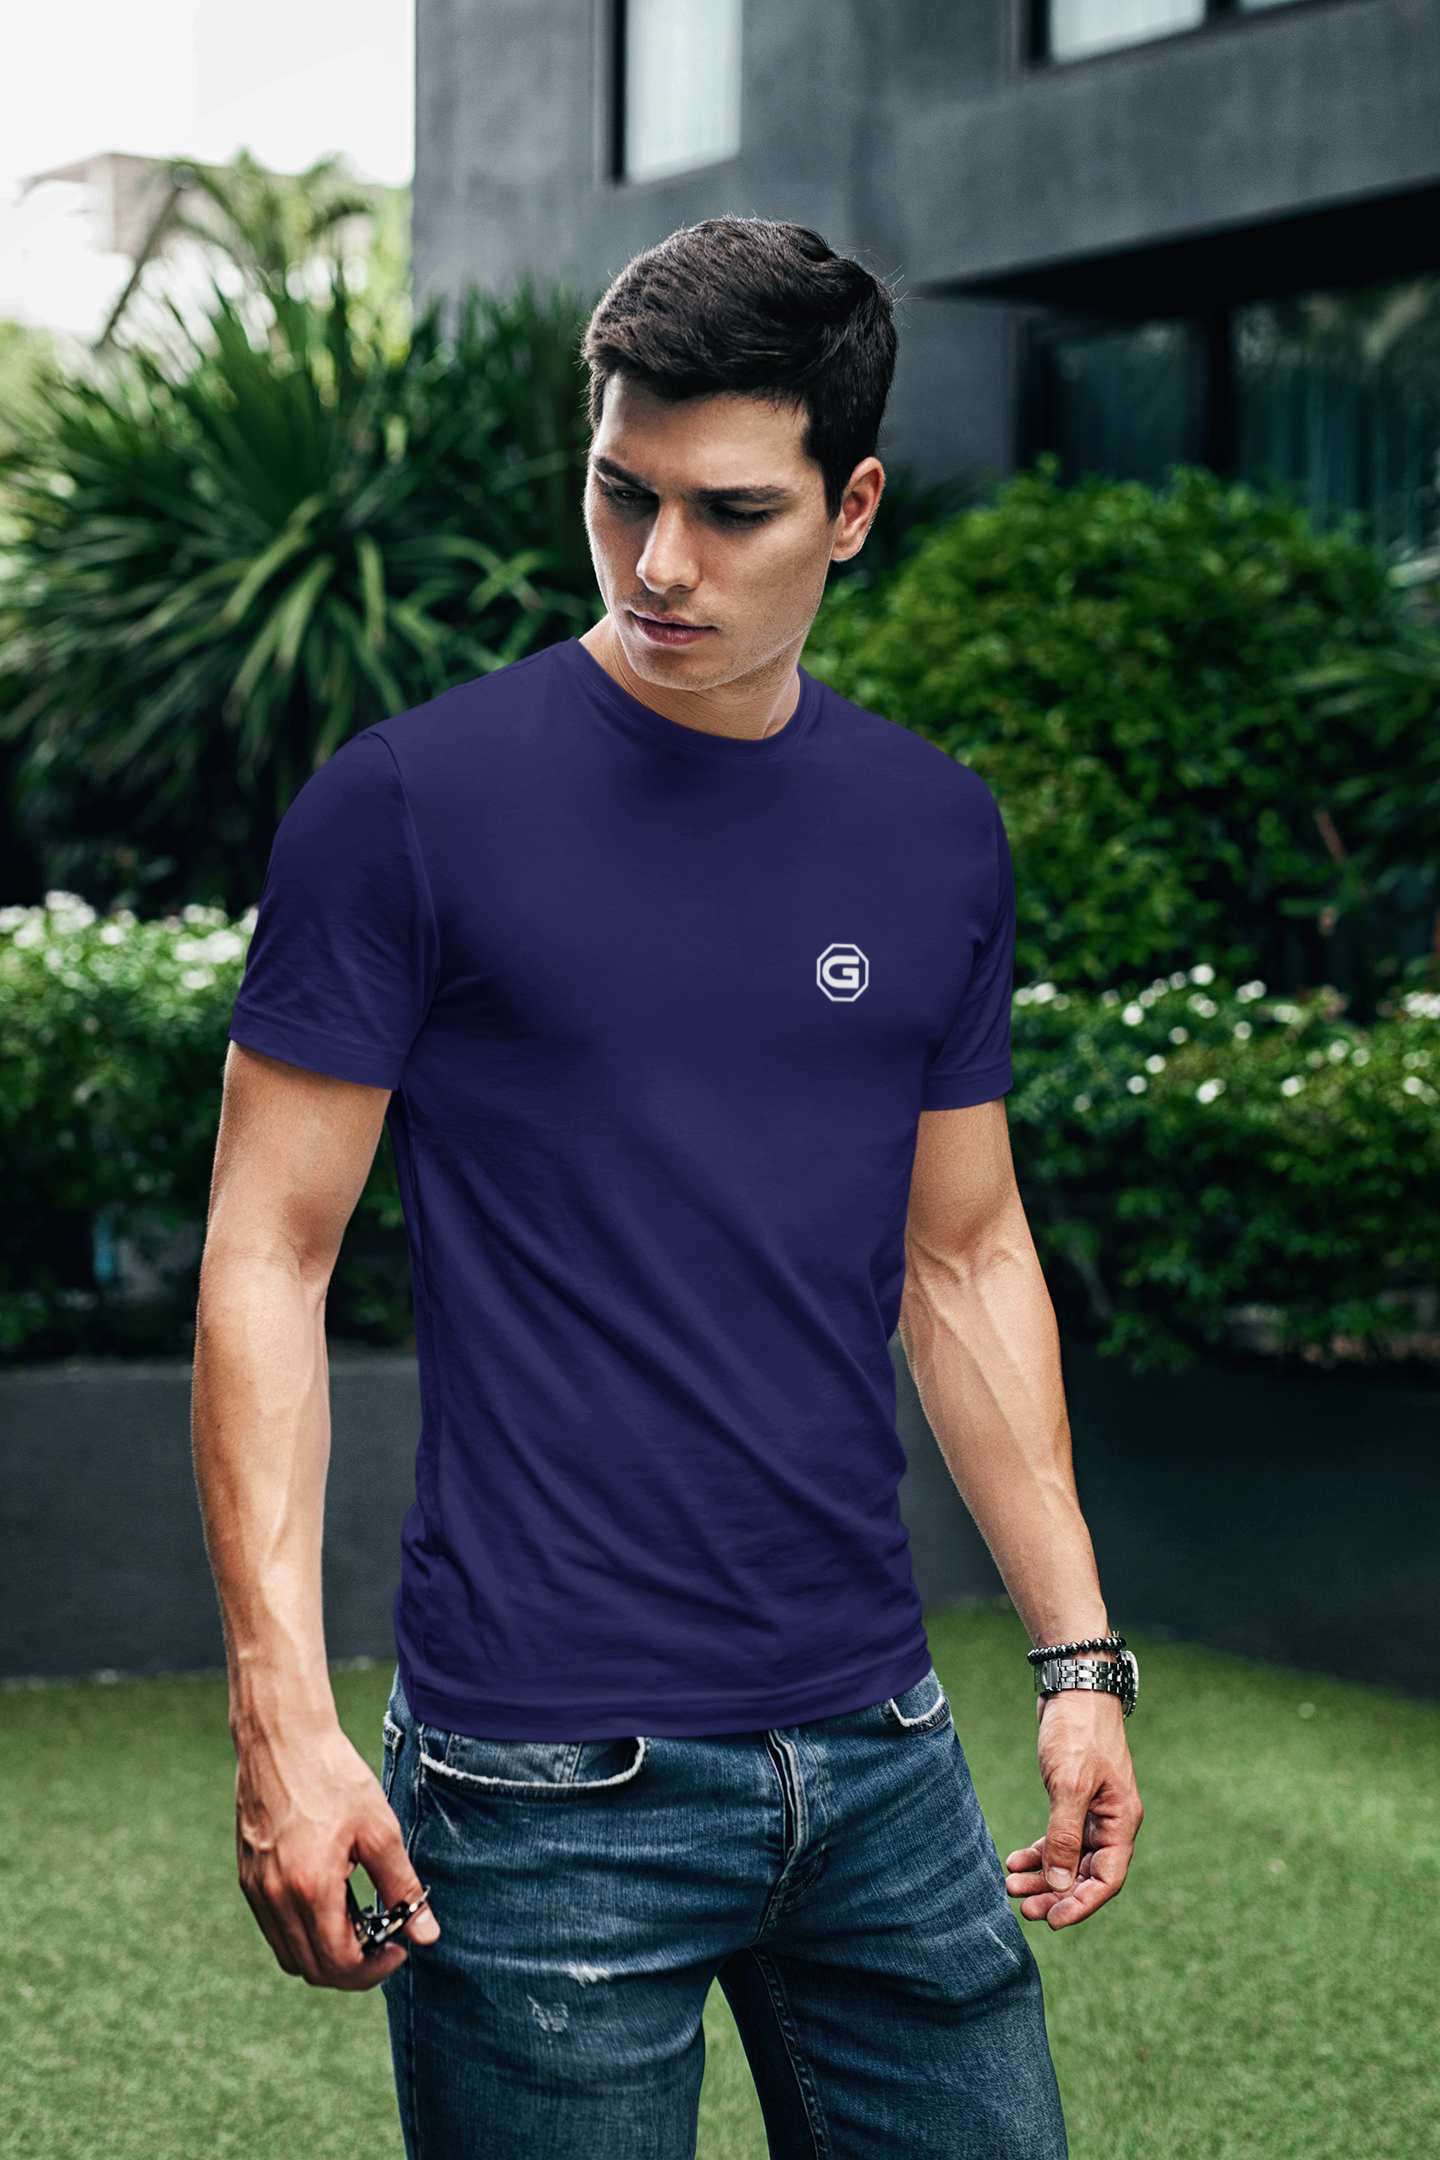 Stylish T shirts for men Active / Leisure Wear | Gymate small G logo navy